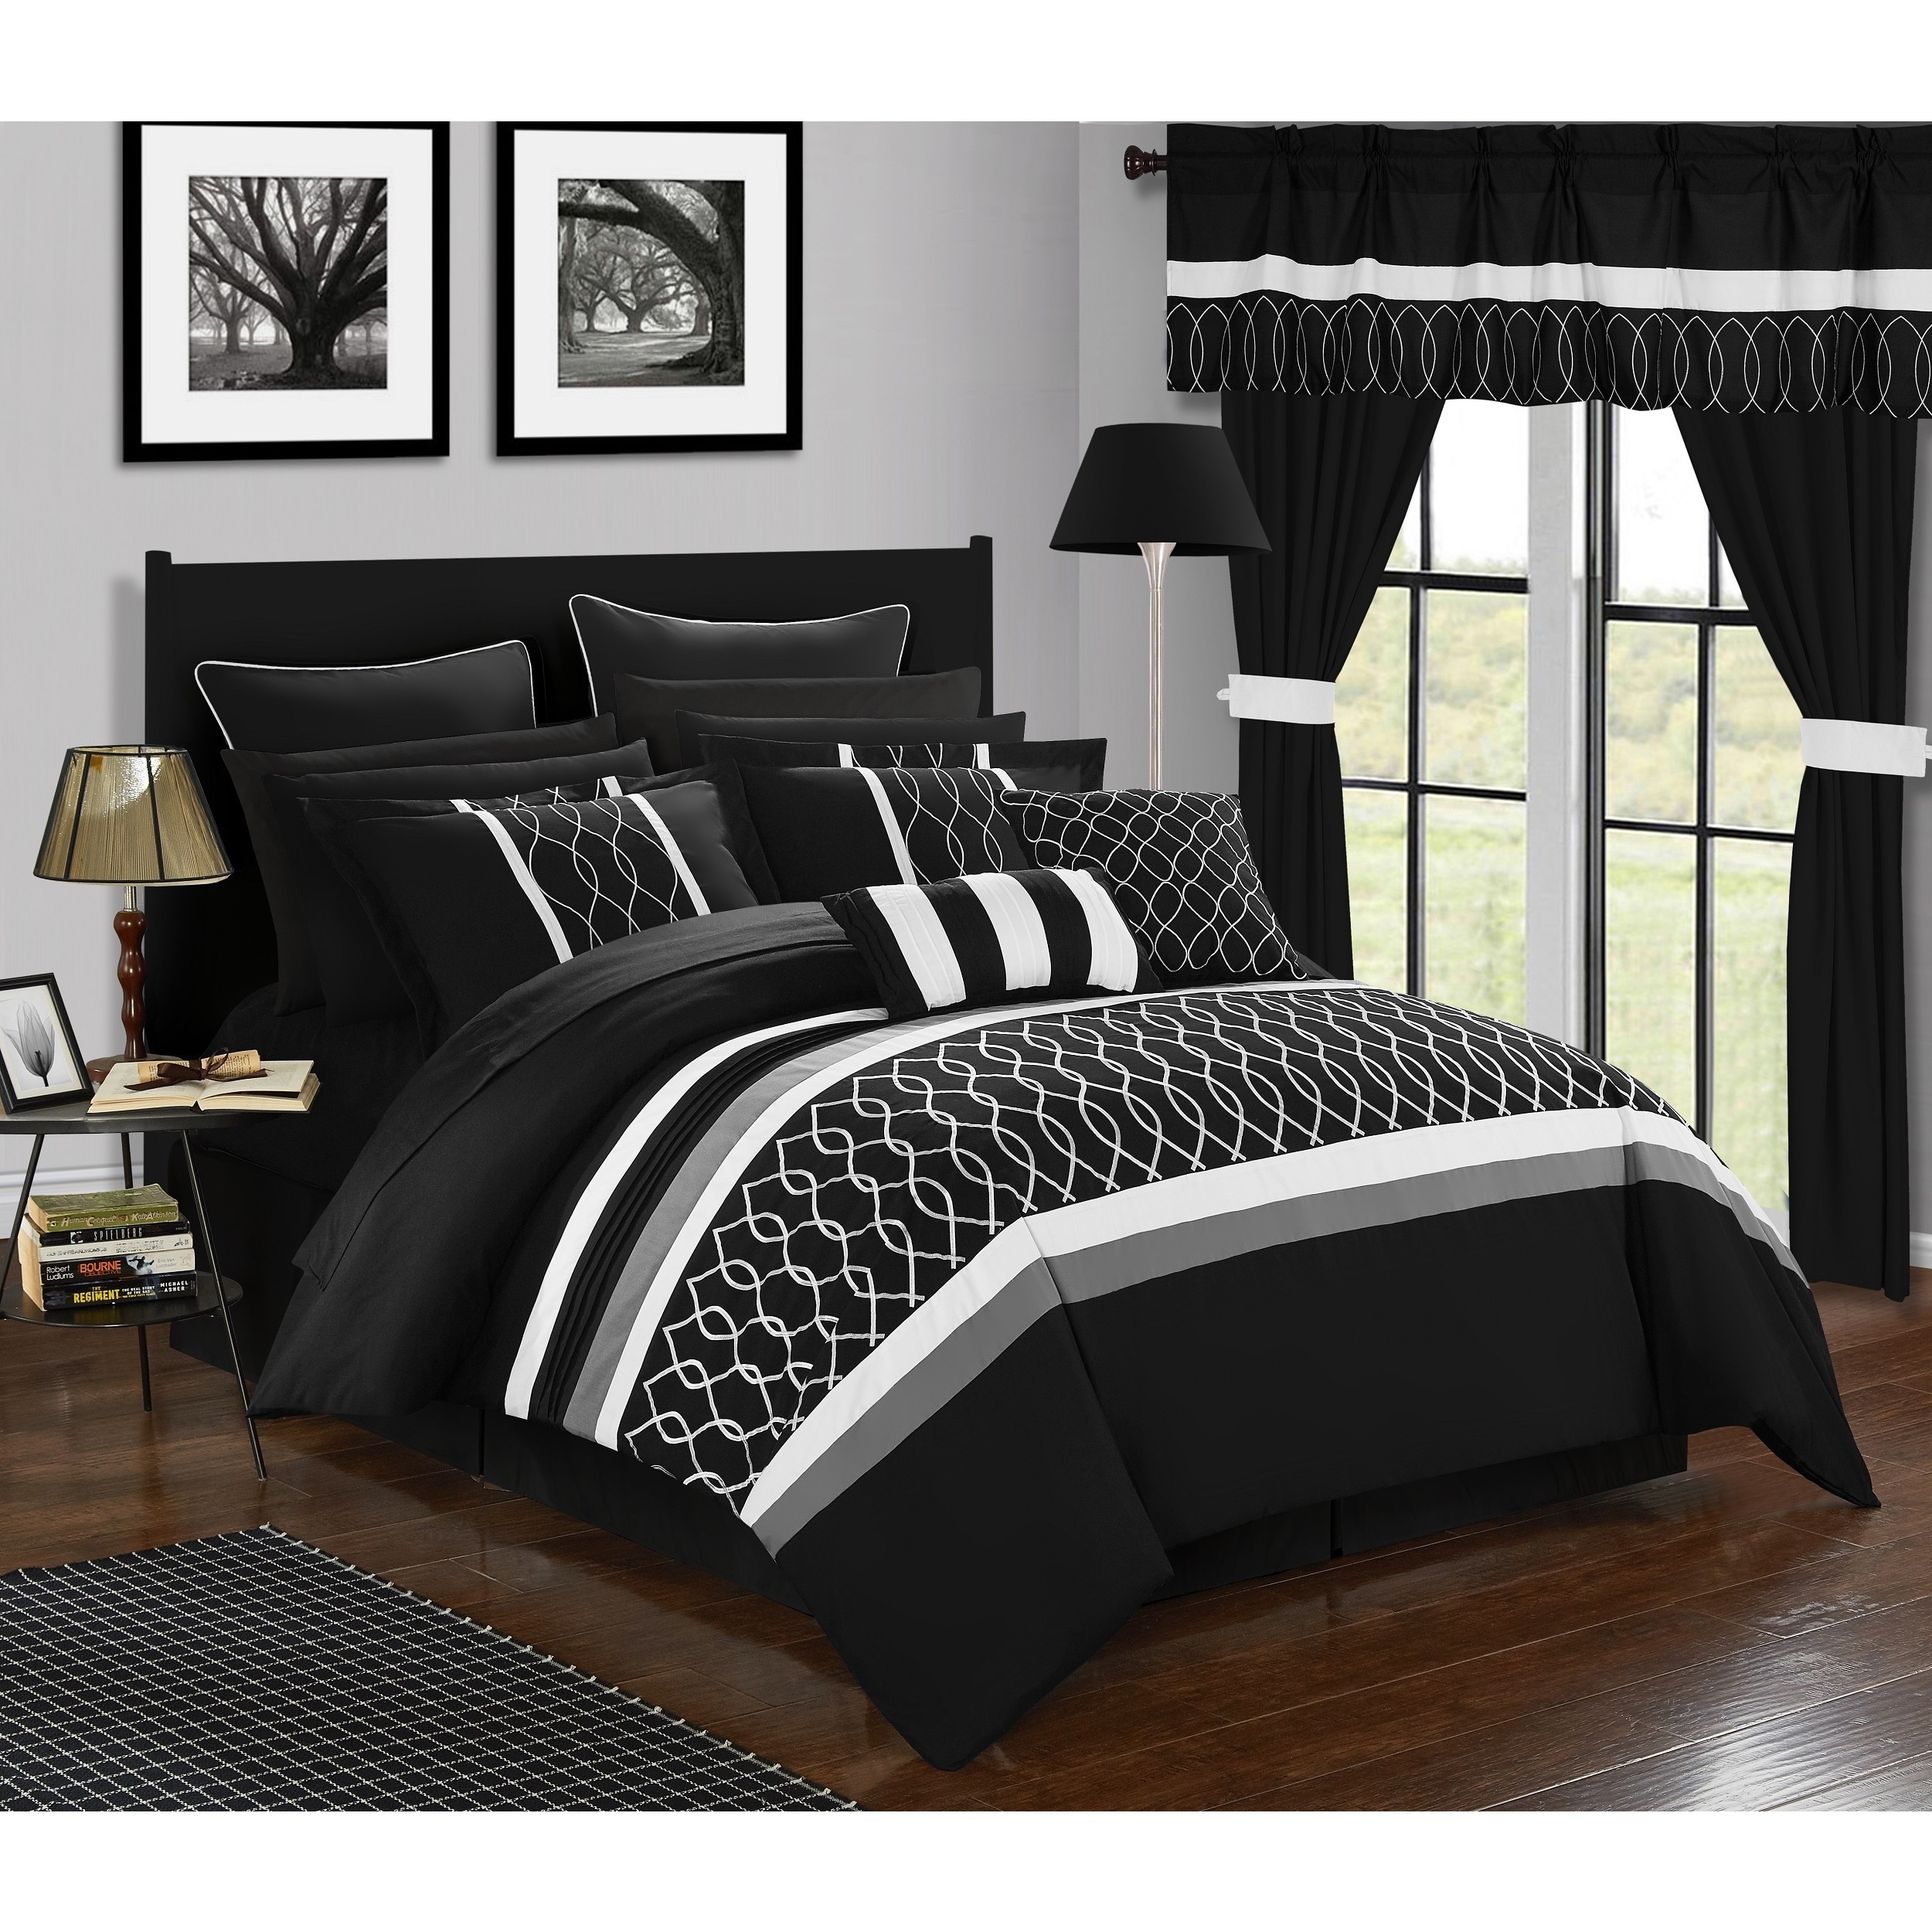 Shop Chic Home 24 Piece Lance King Bed In A Bag Comforter Set On